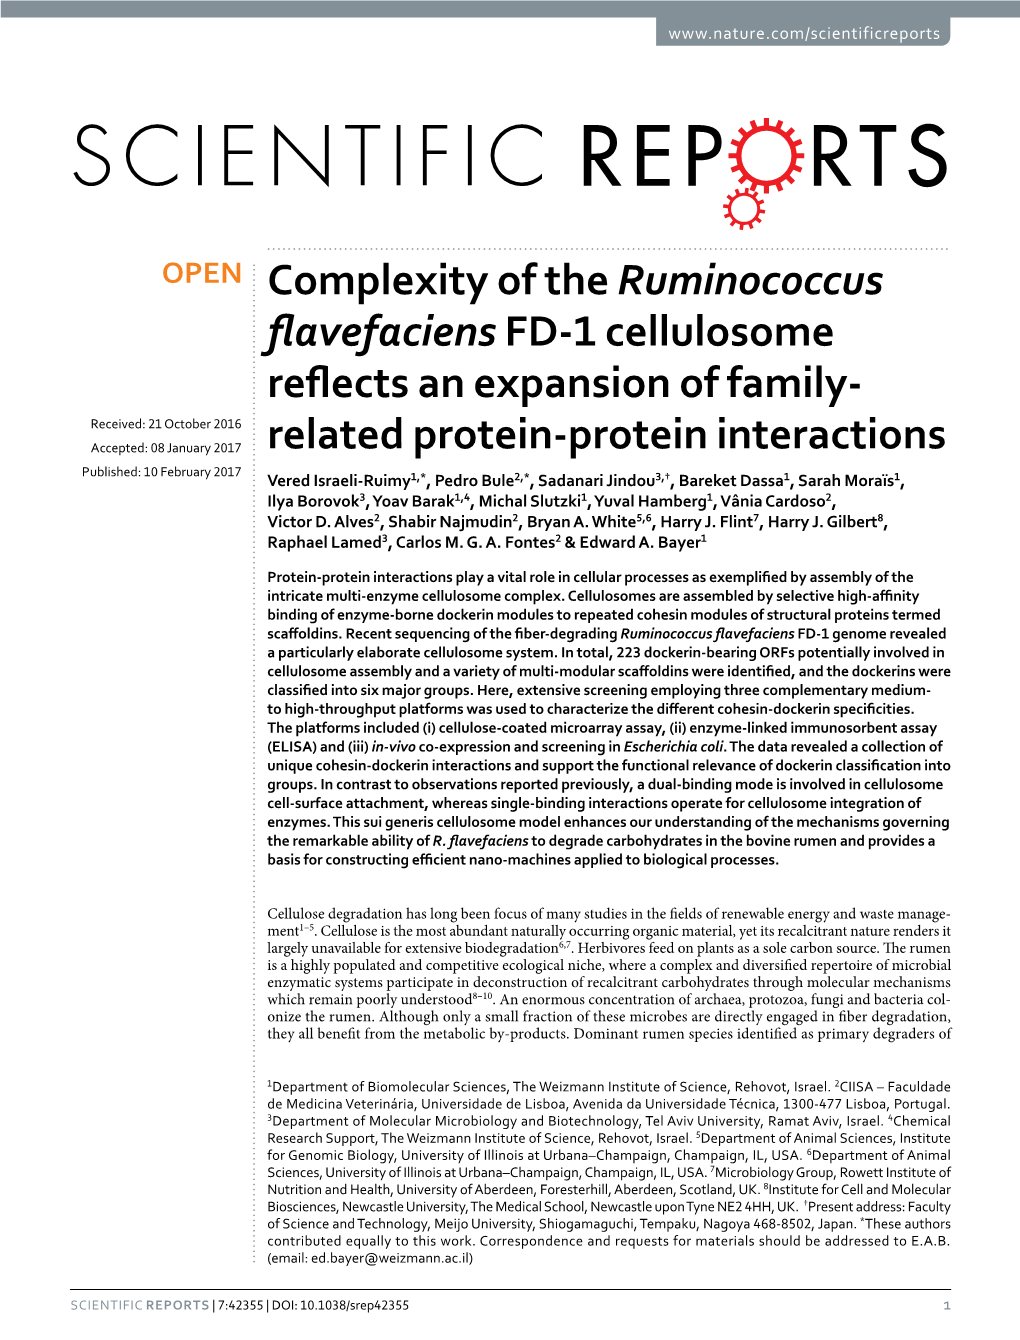 Complexity of the Ruminococcus Flavefaciens FD-1